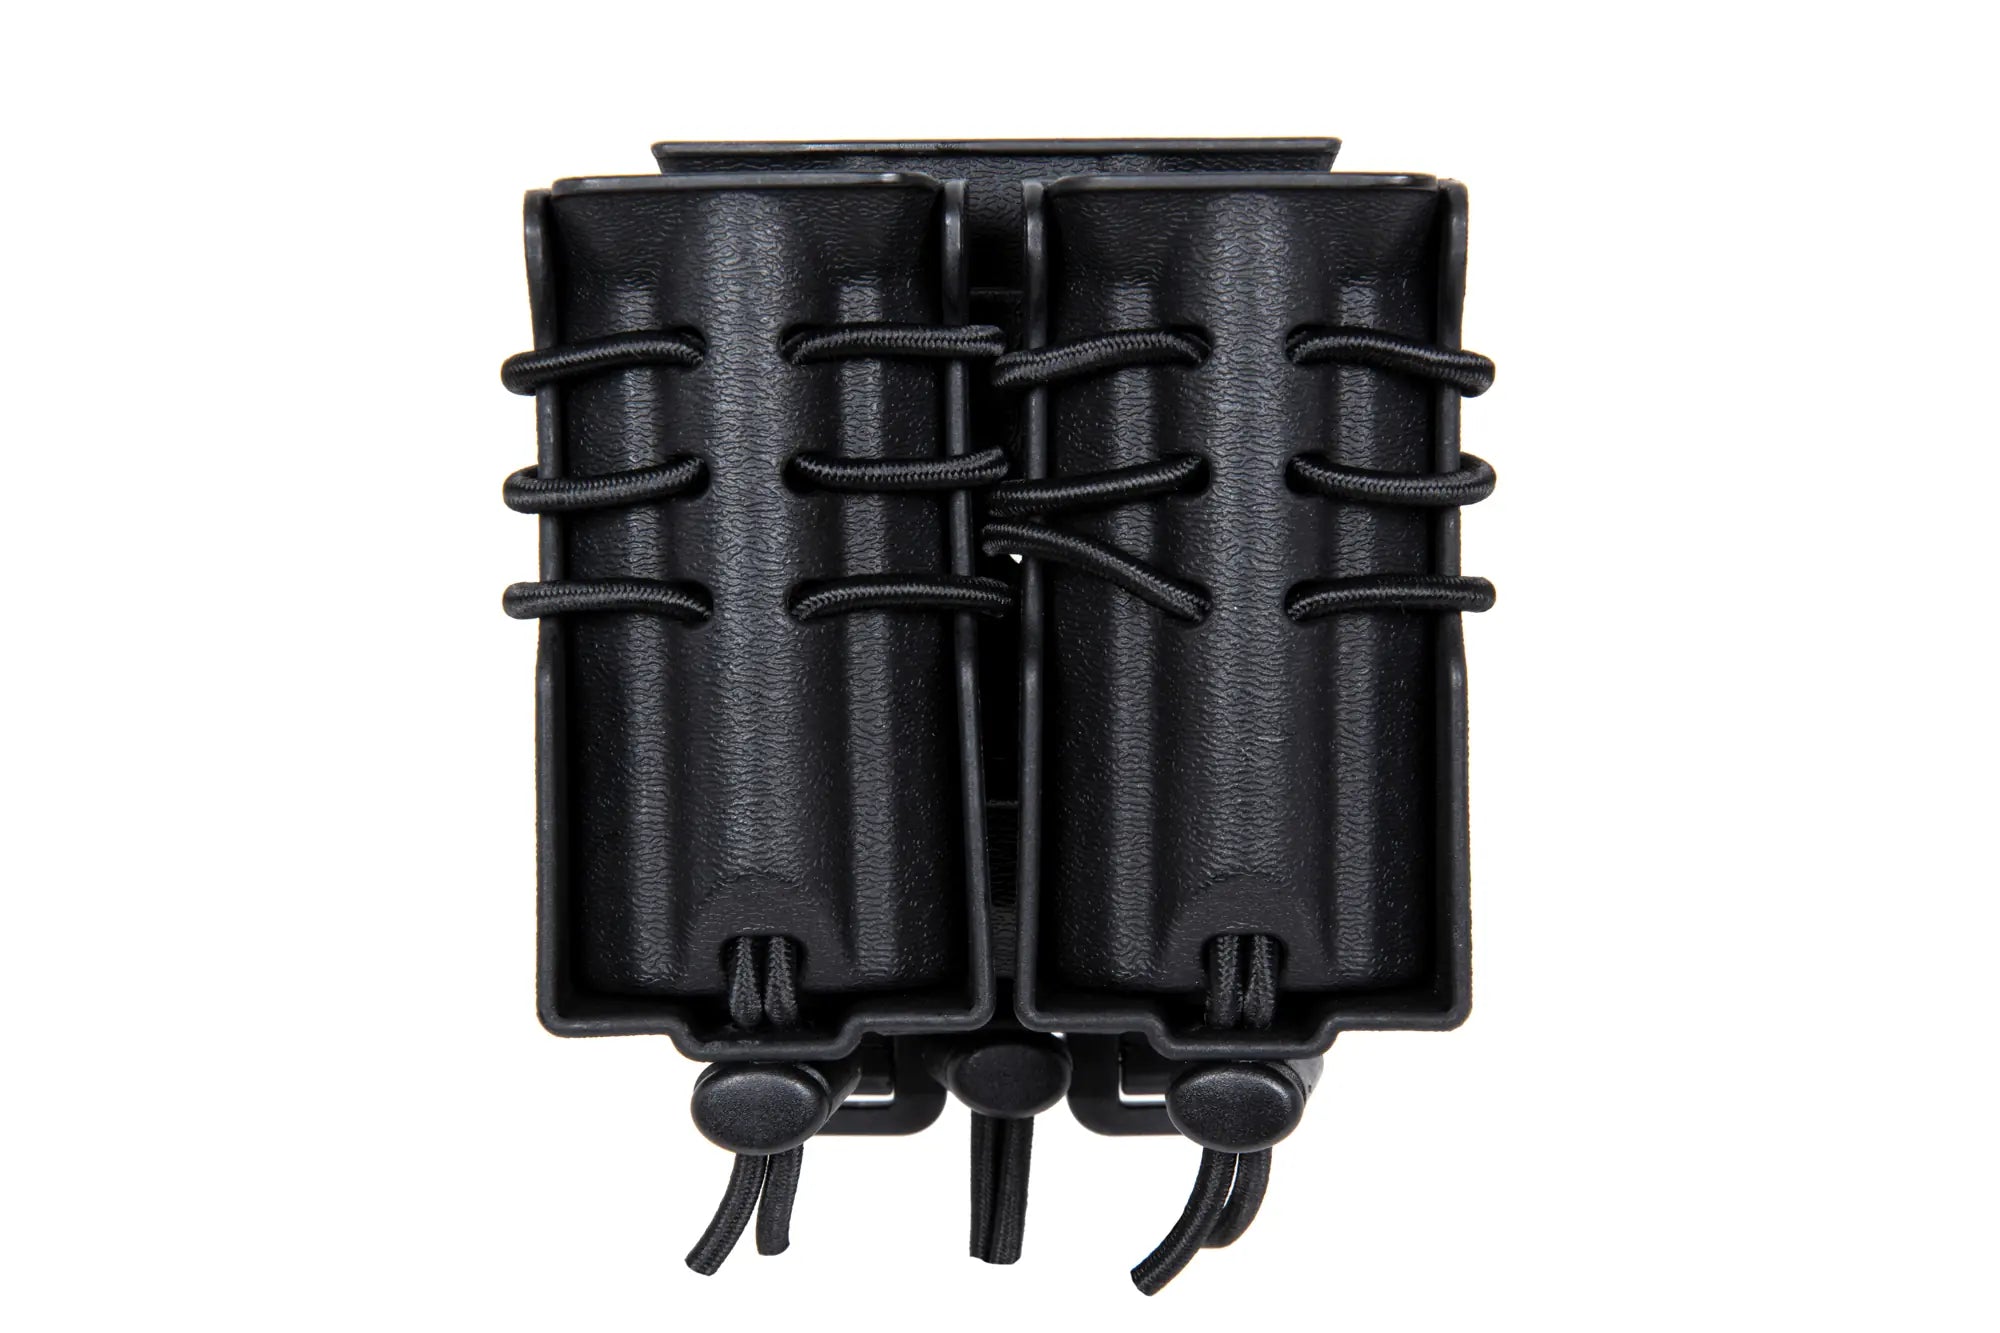 Carrier for 2 9mm magazines and an M4/M16 magazine Wosport Urban Assault Quick Pull Black